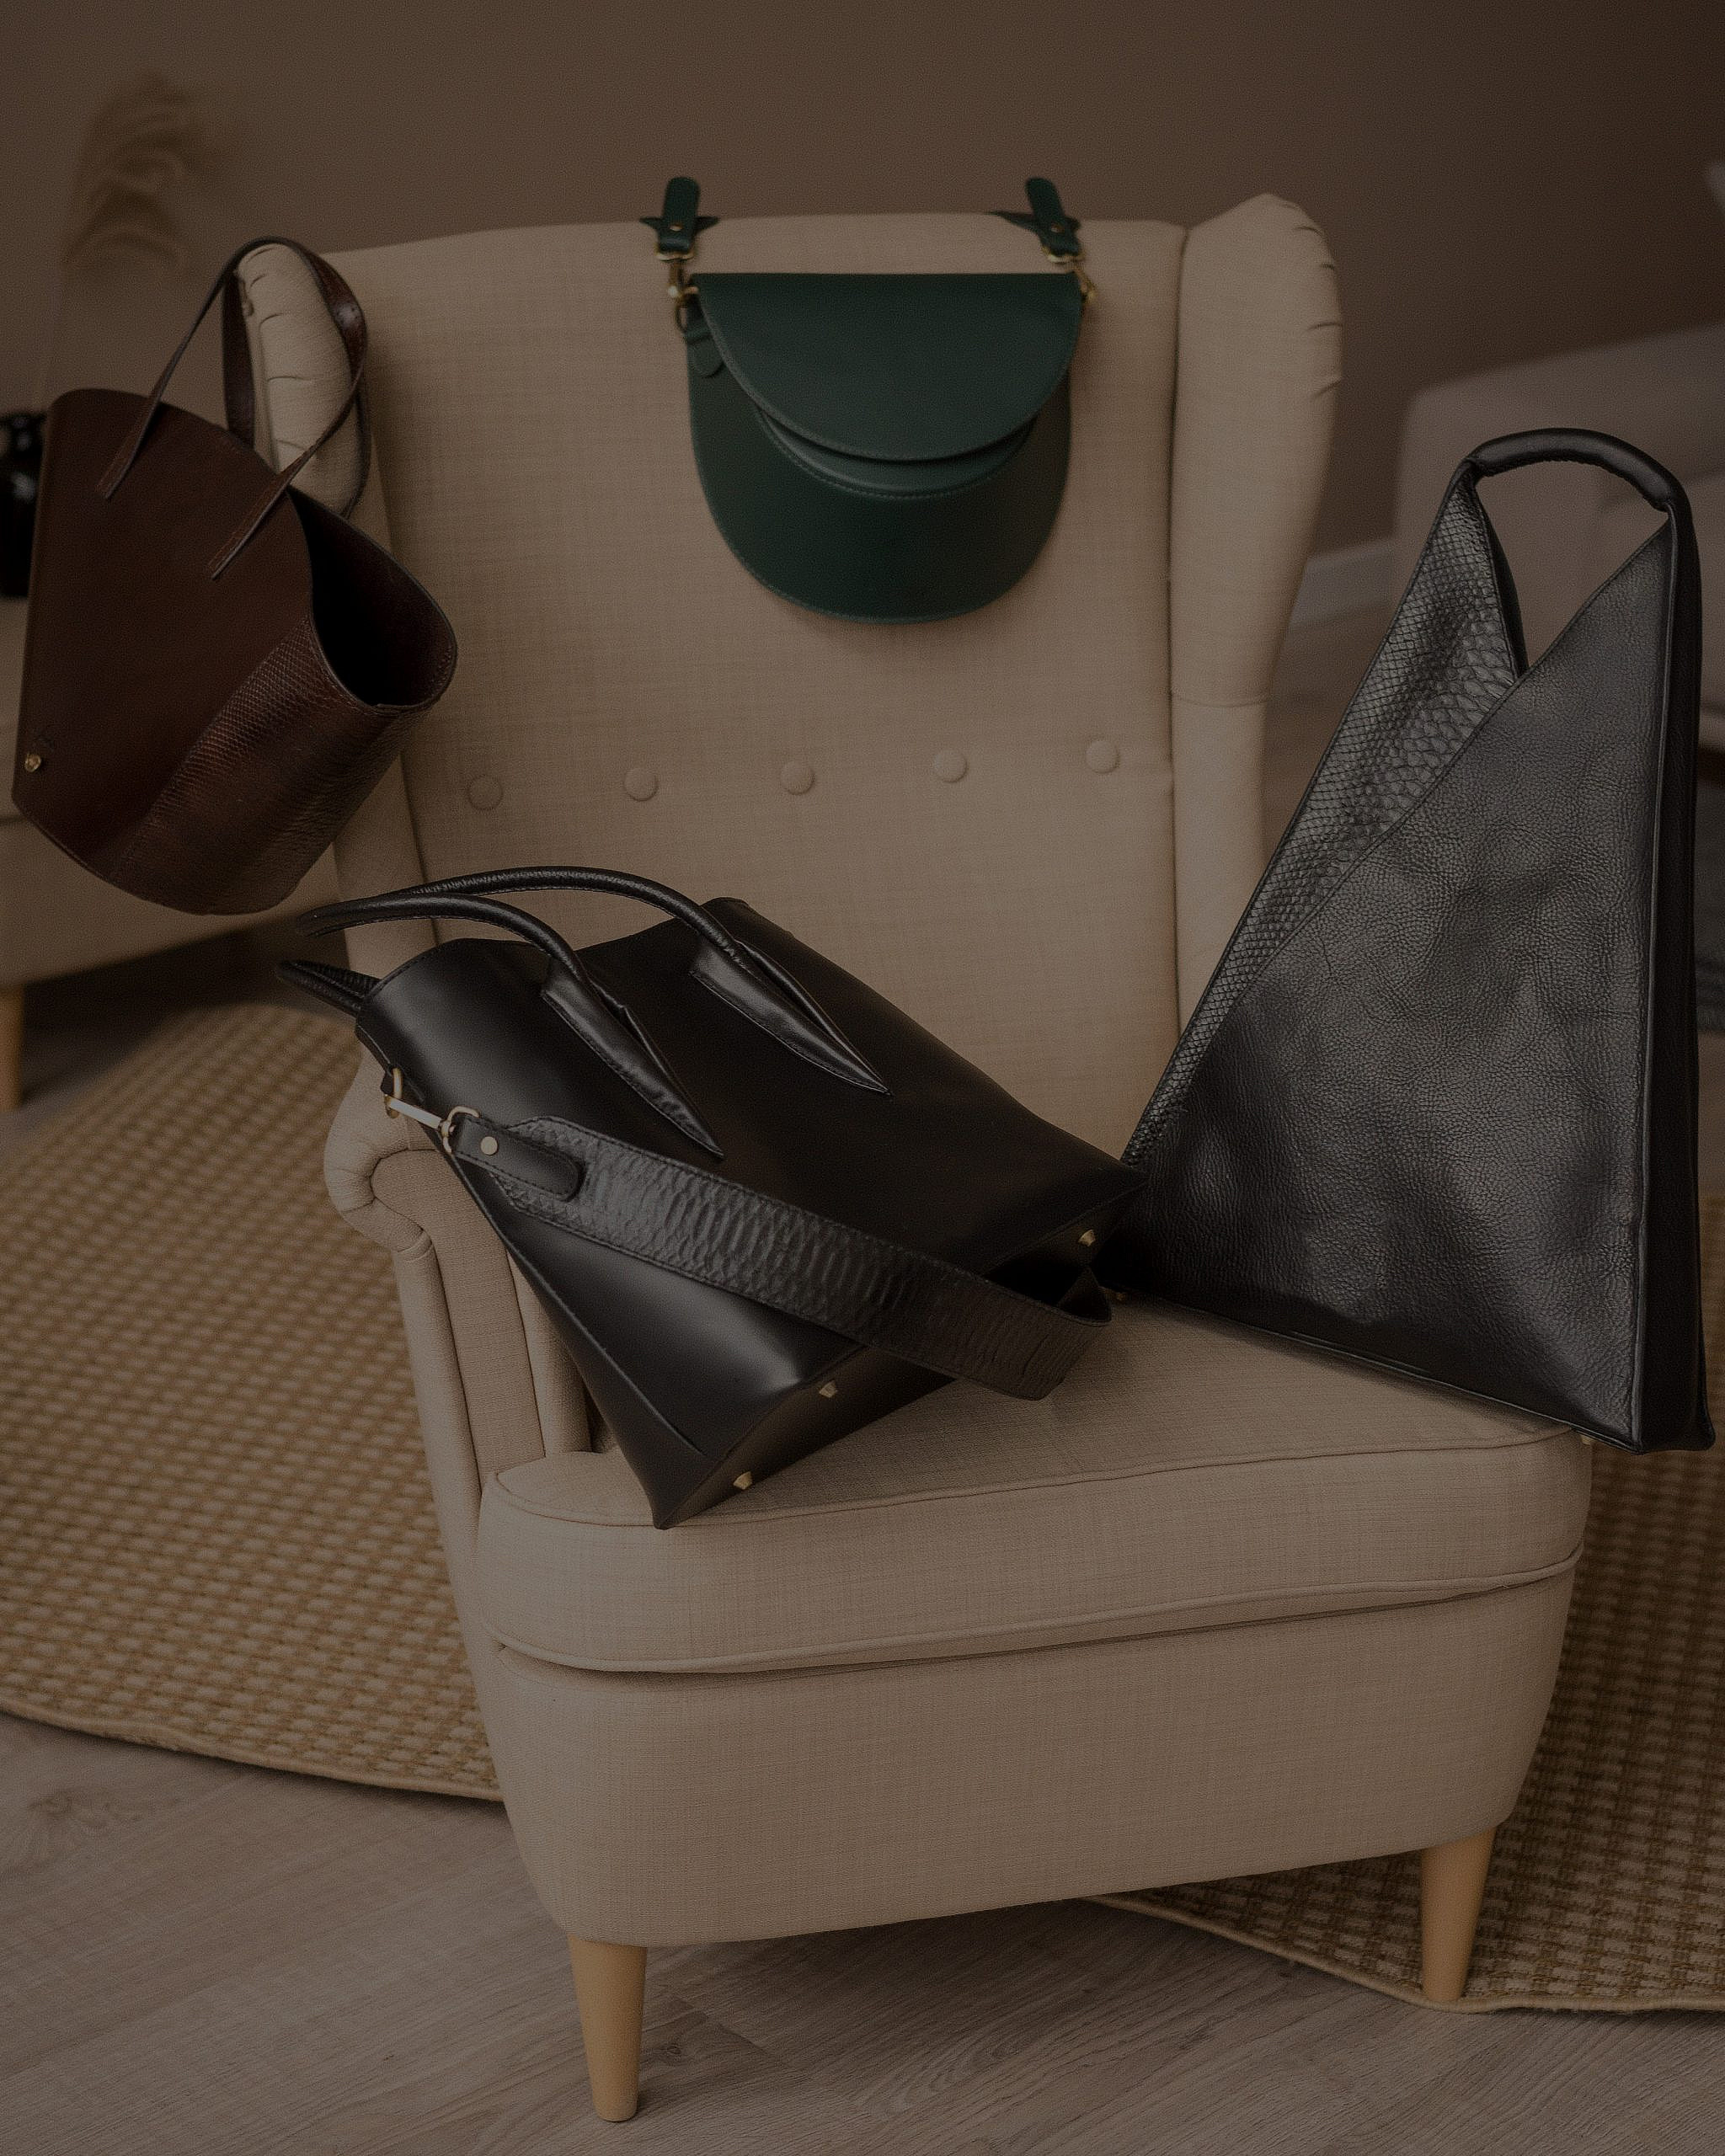 Reco: The small-batch accessories brand using only surplus leather